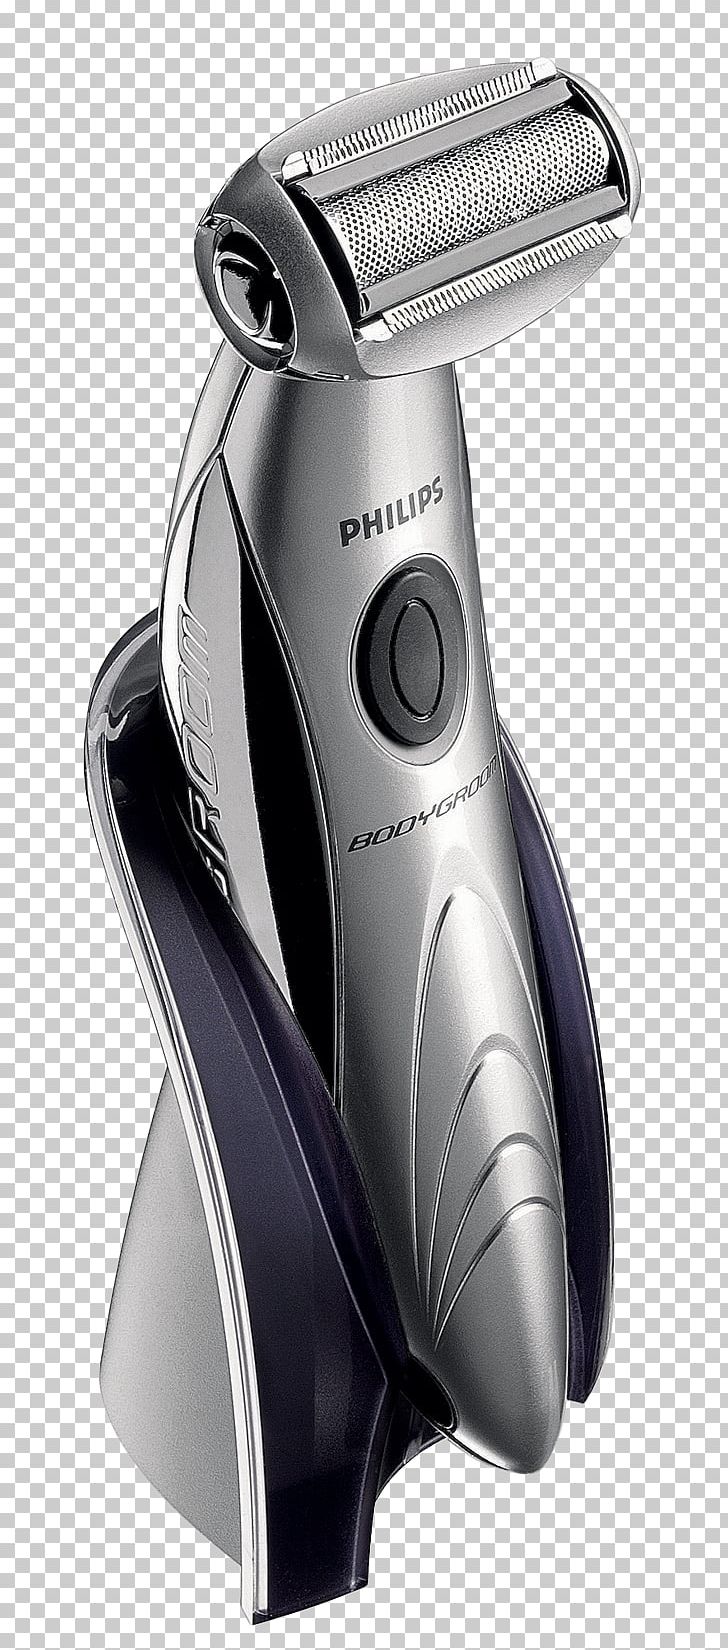 Hair Clipper Philips Shaving Electric Razor Body Grooming PNG, Clipart, Automotive Design, Black Hair, Electronic, Electronic Product, Equipment Free PNG Download